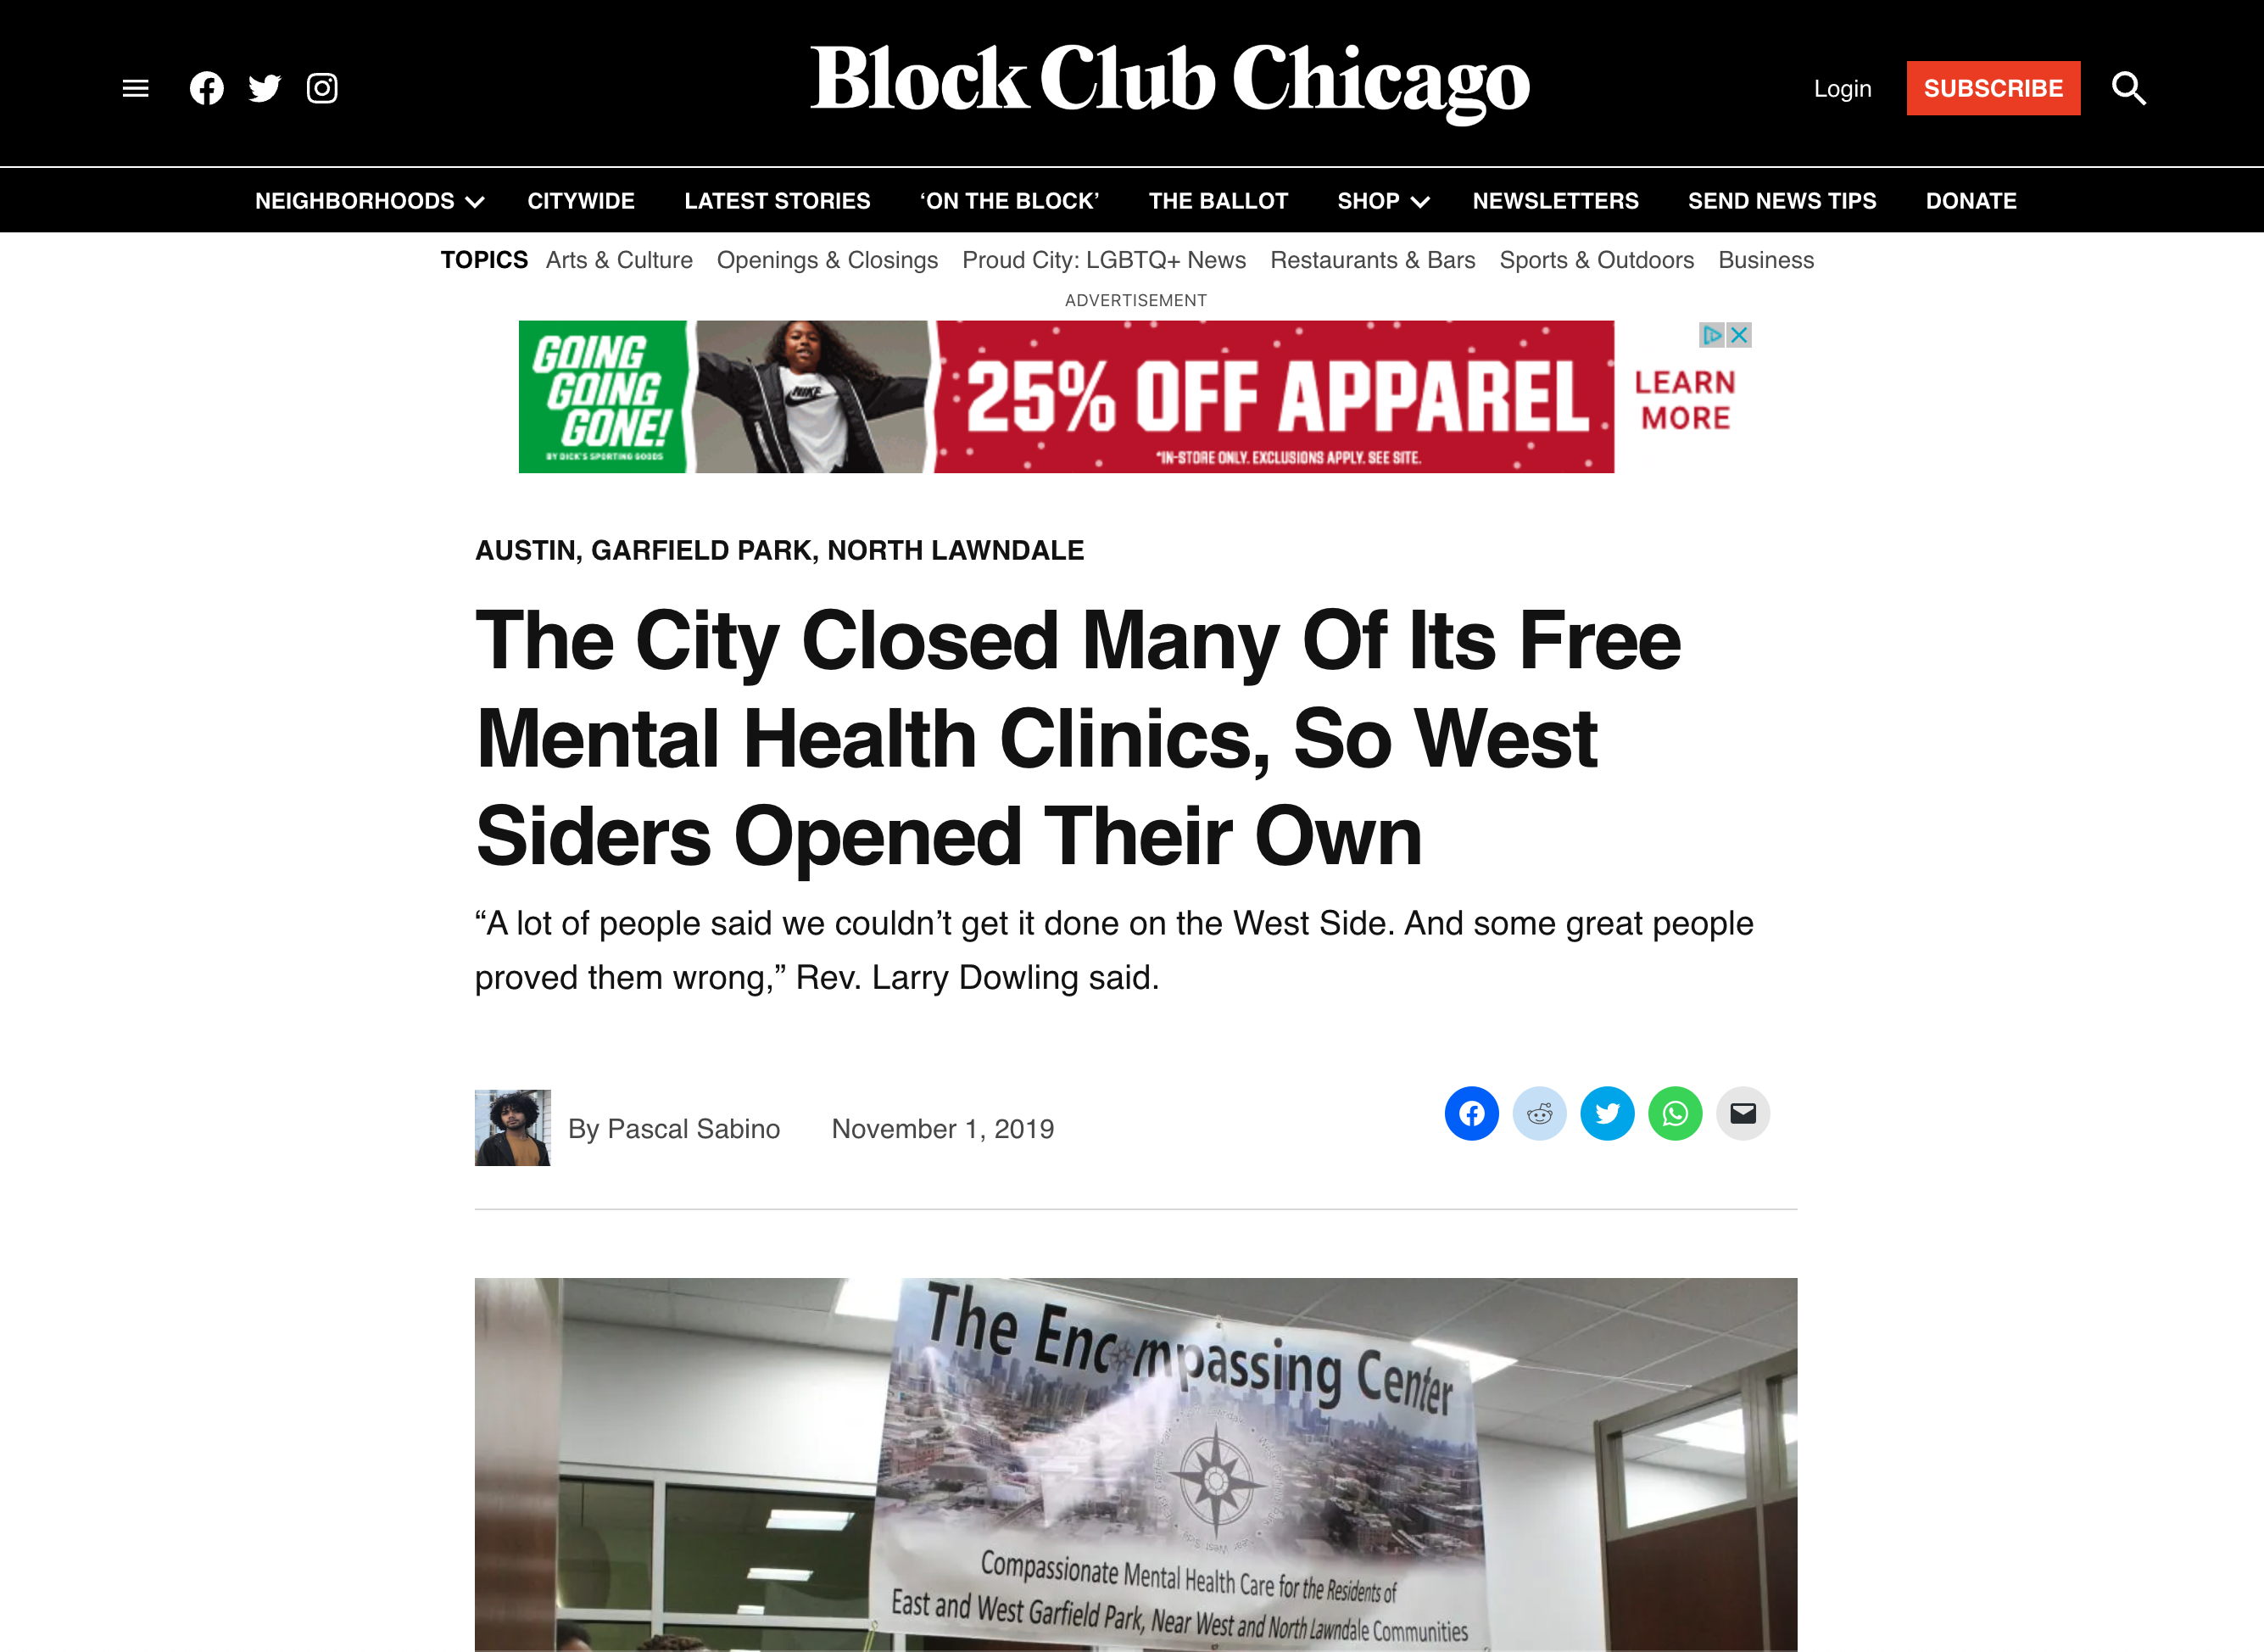 The City Closed Many Of Its Free Mental Health Clinics, So West Siders Opened Their Own